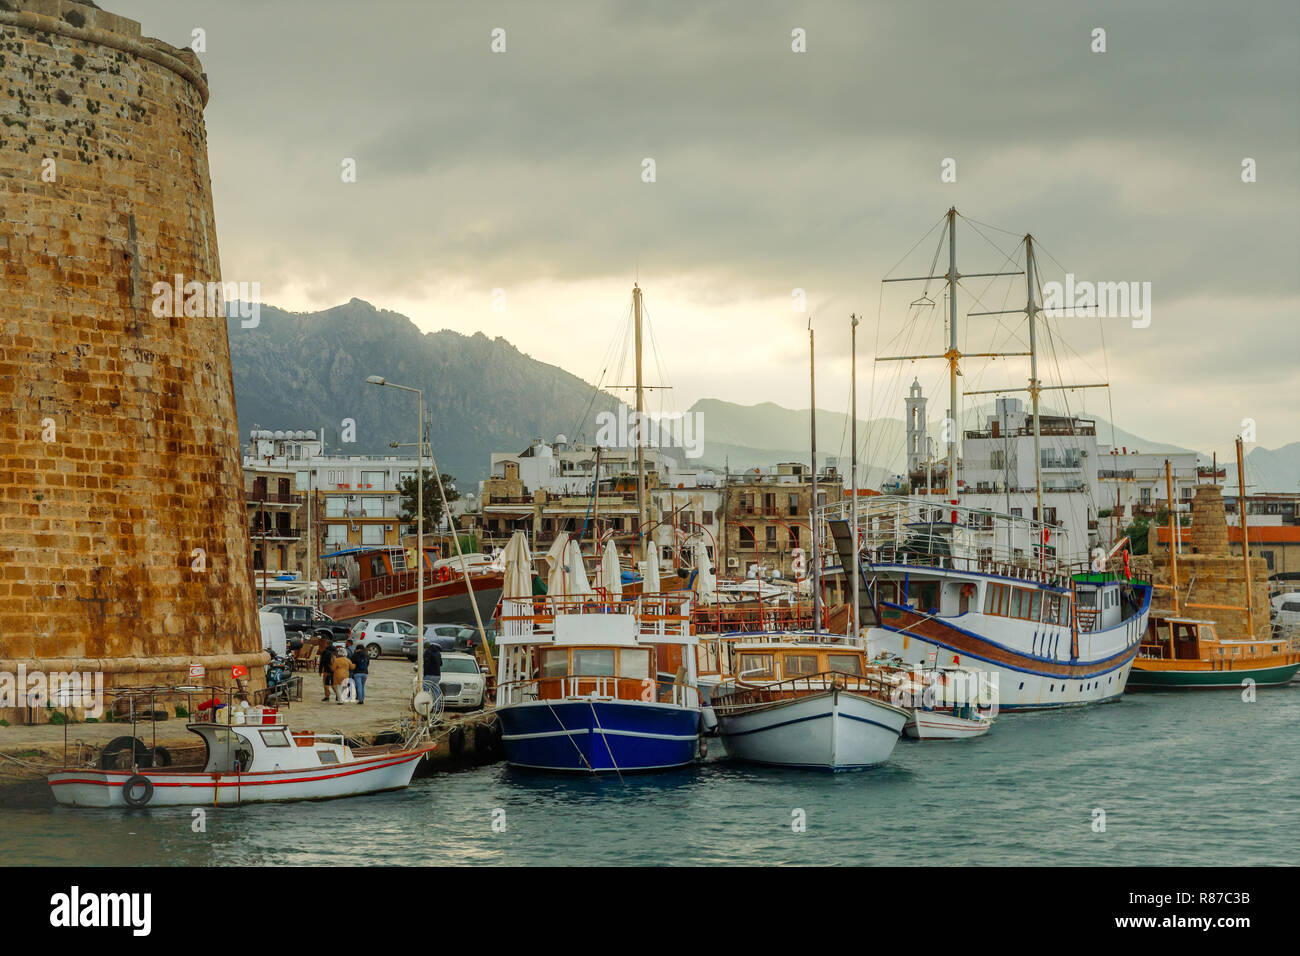 Kyrenia or Girne  historical city center, view to marina with many yachts and boats with Venetian castle walls and mountains in the background, North  Stock Photo